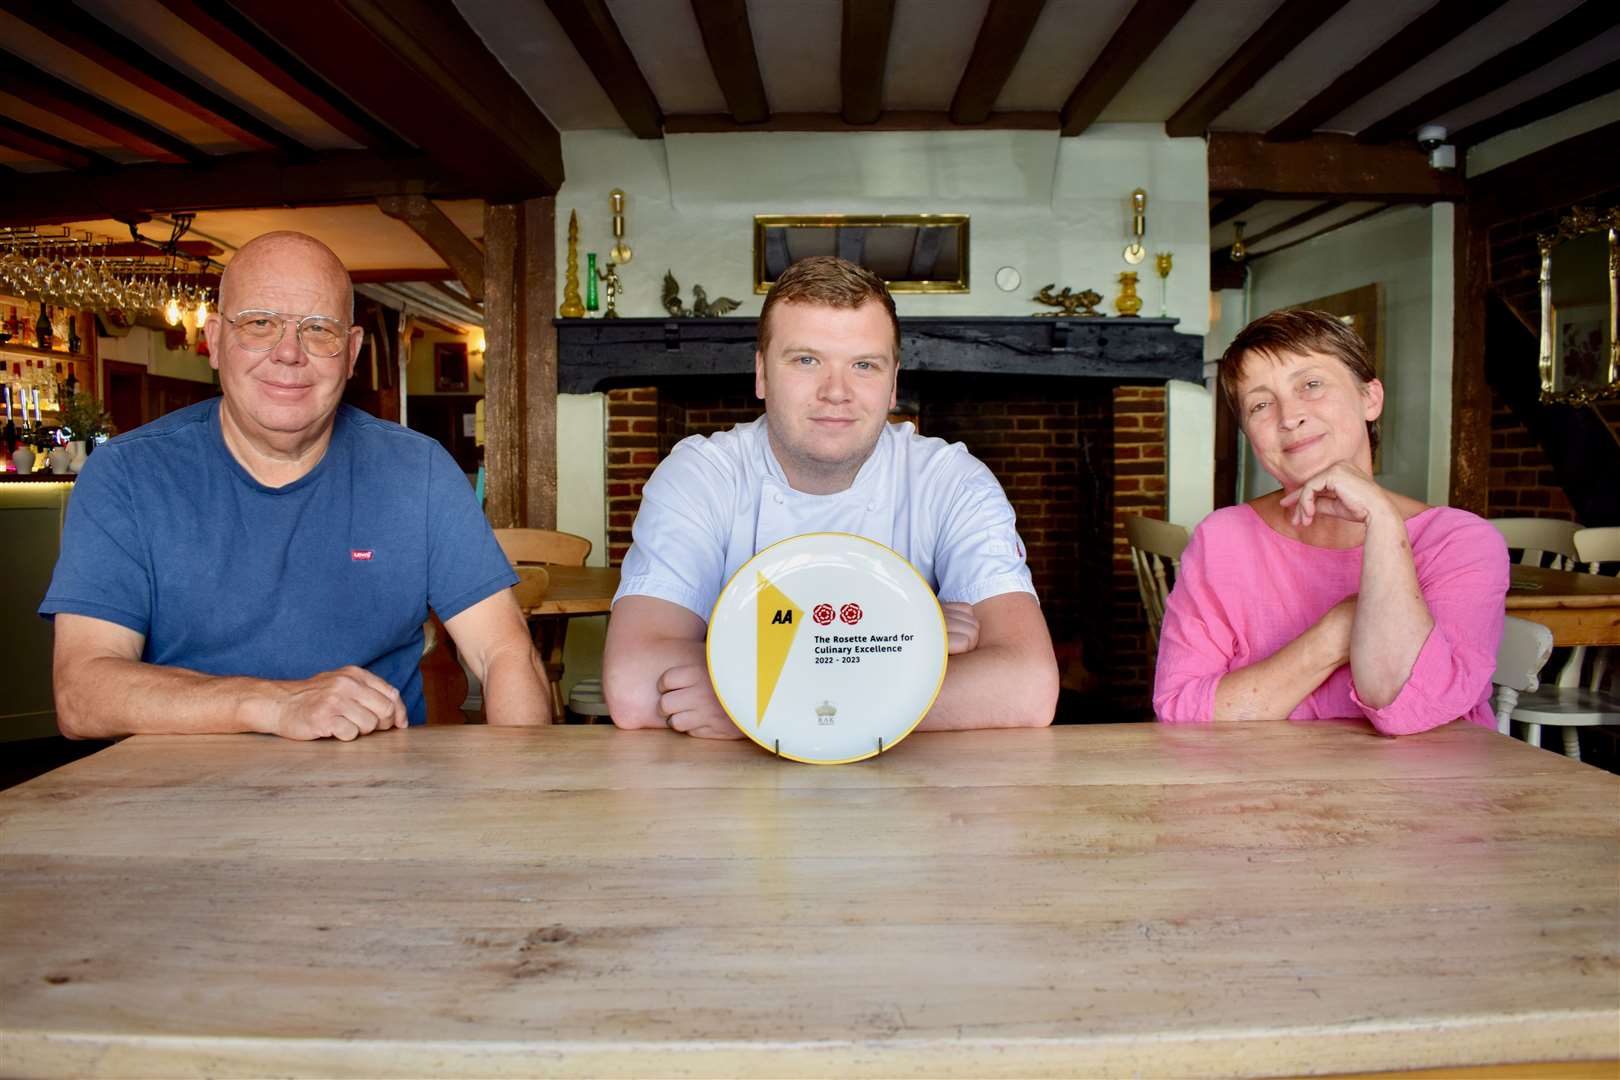 Kim Sharrock, Adrian Atkins and Scott Pendry of The Phoenix Tavern in Faversham are celebrating being awarded two AA Rosettes